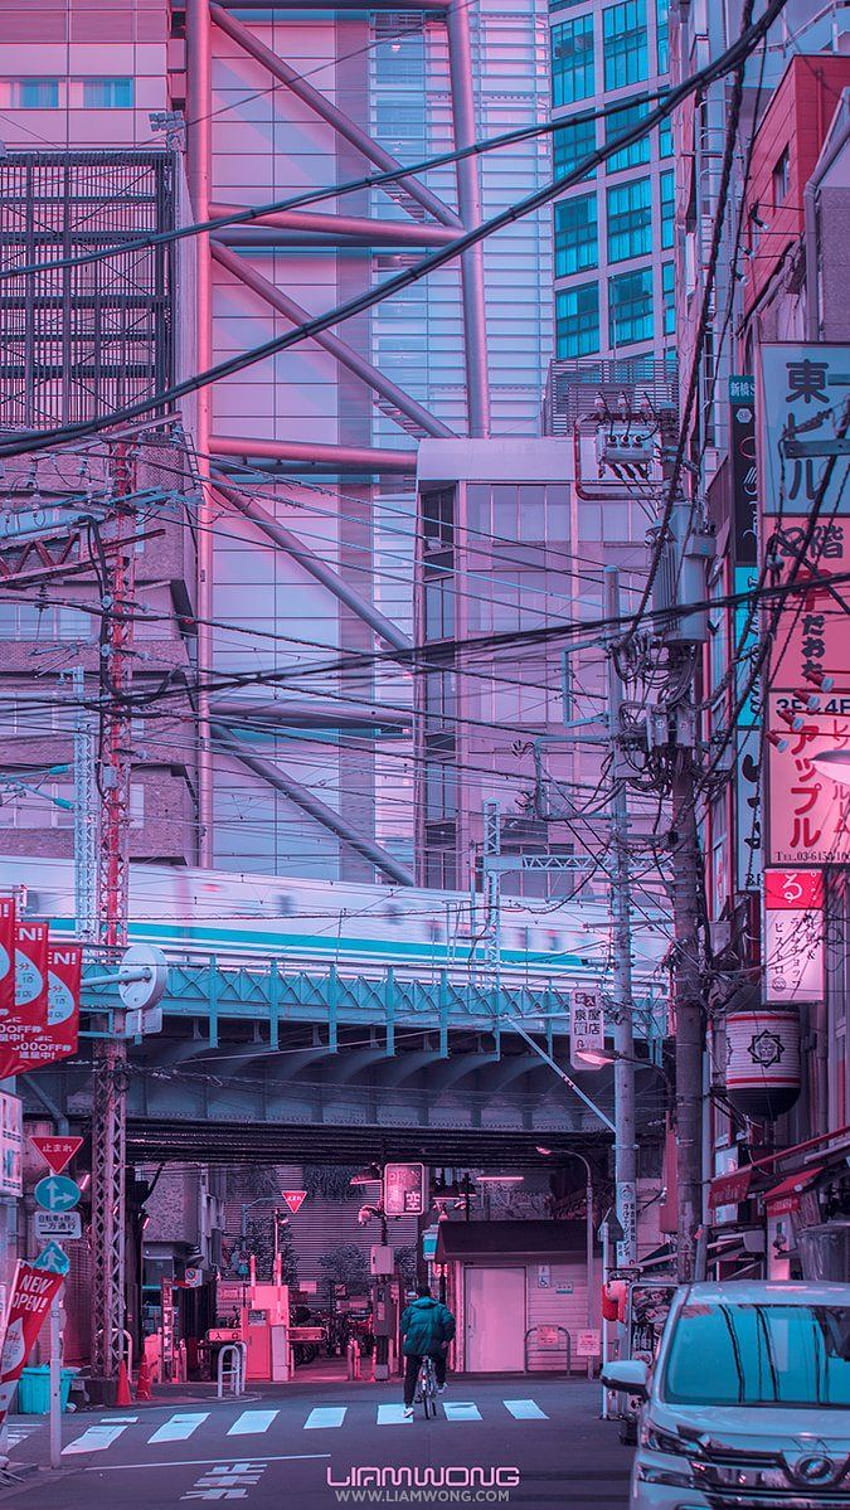 Aesthetic wallpaper of a train passing through a city in Japan - Anime city, rain, Tokyo